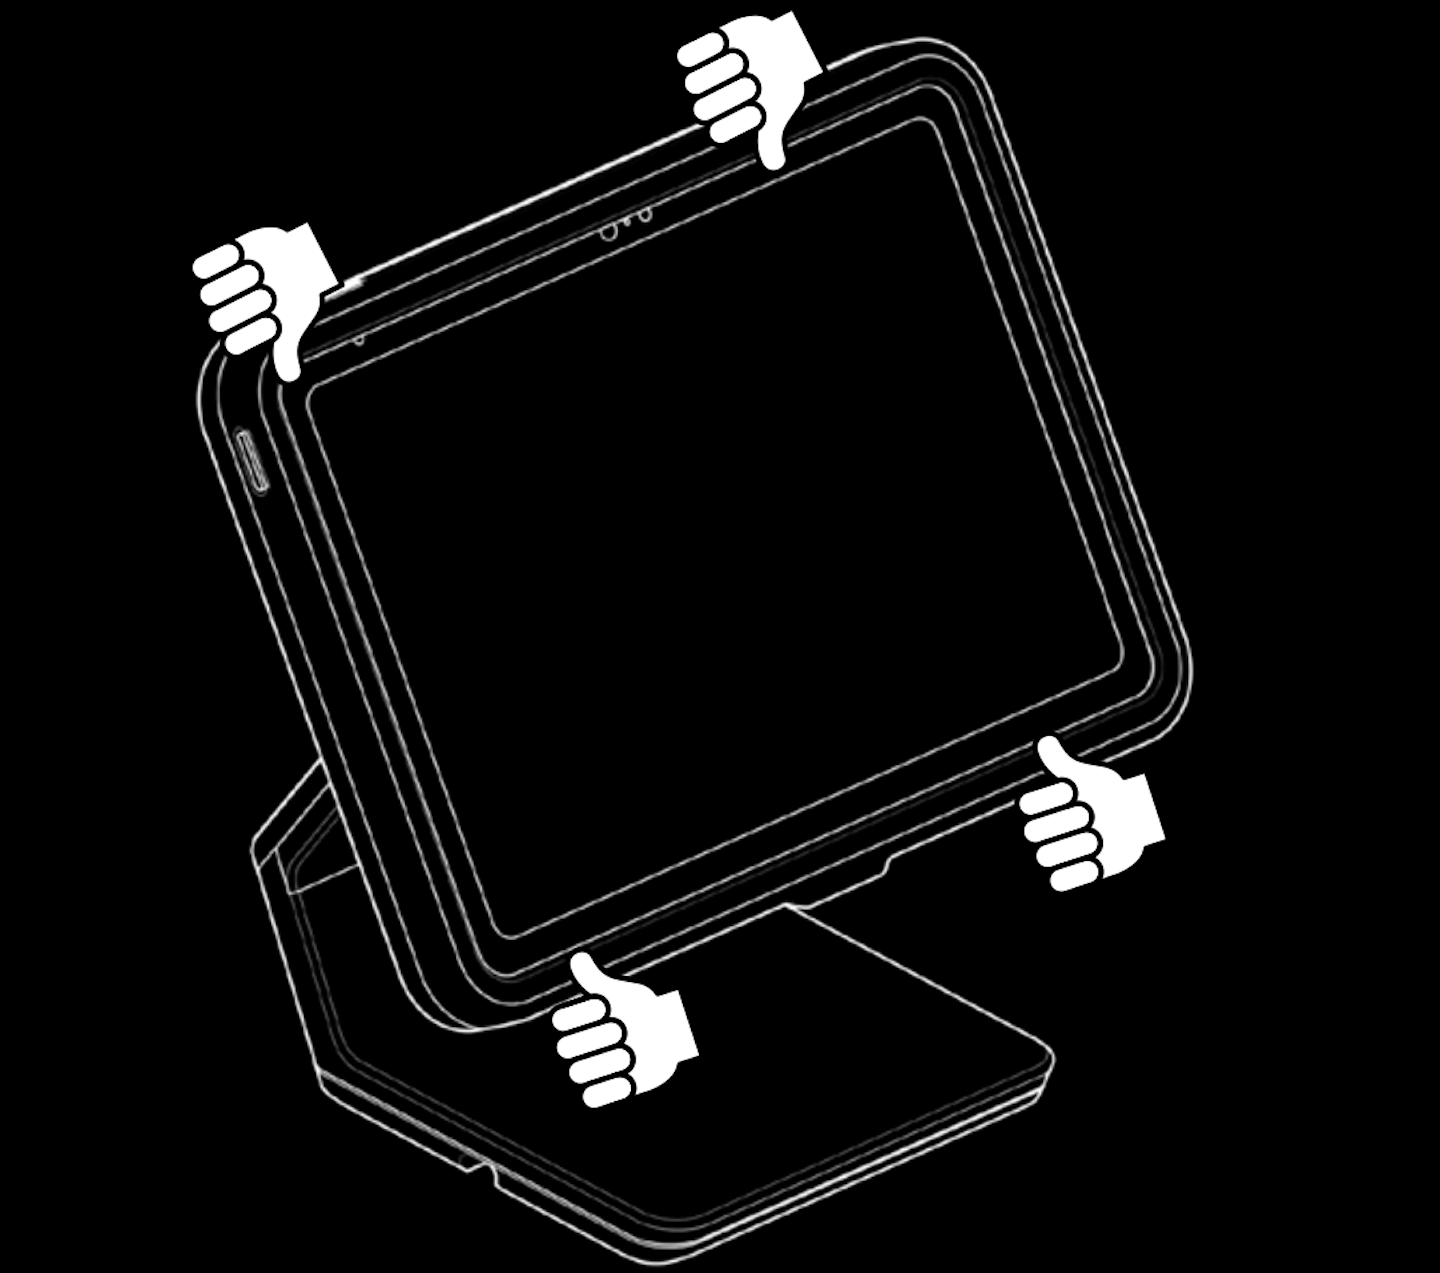 Illustration of Lightspeed Stand with bezel placed. Illustrations of hands indicate that the bezel should be pressed down using thumbs.